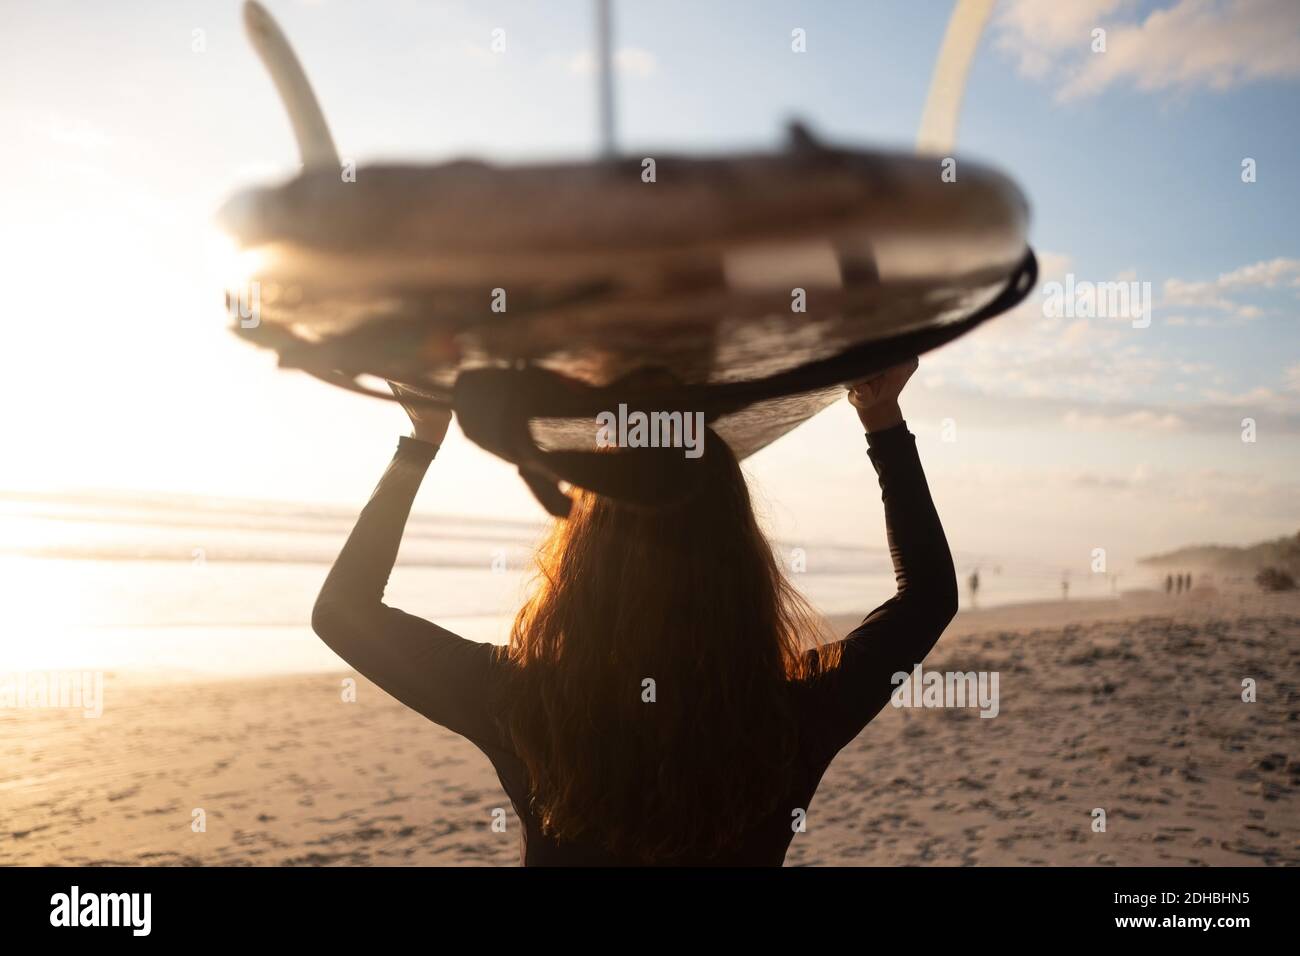 Rear view of mature woman carrying surfboard on head at beach Stock Photo